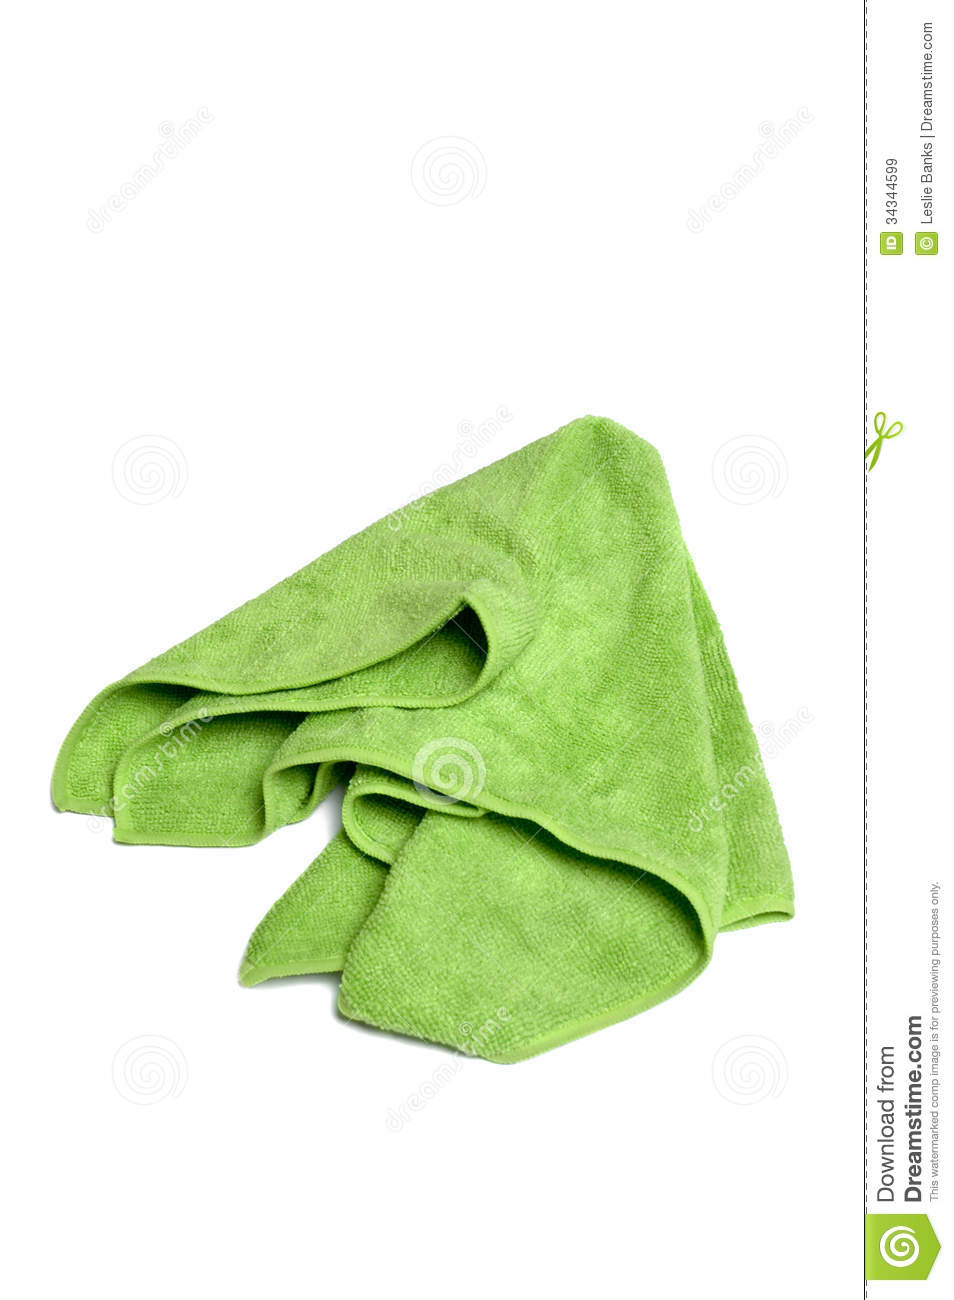 Cleaning Cloth Royalty Free Stock Images   Image  34344599